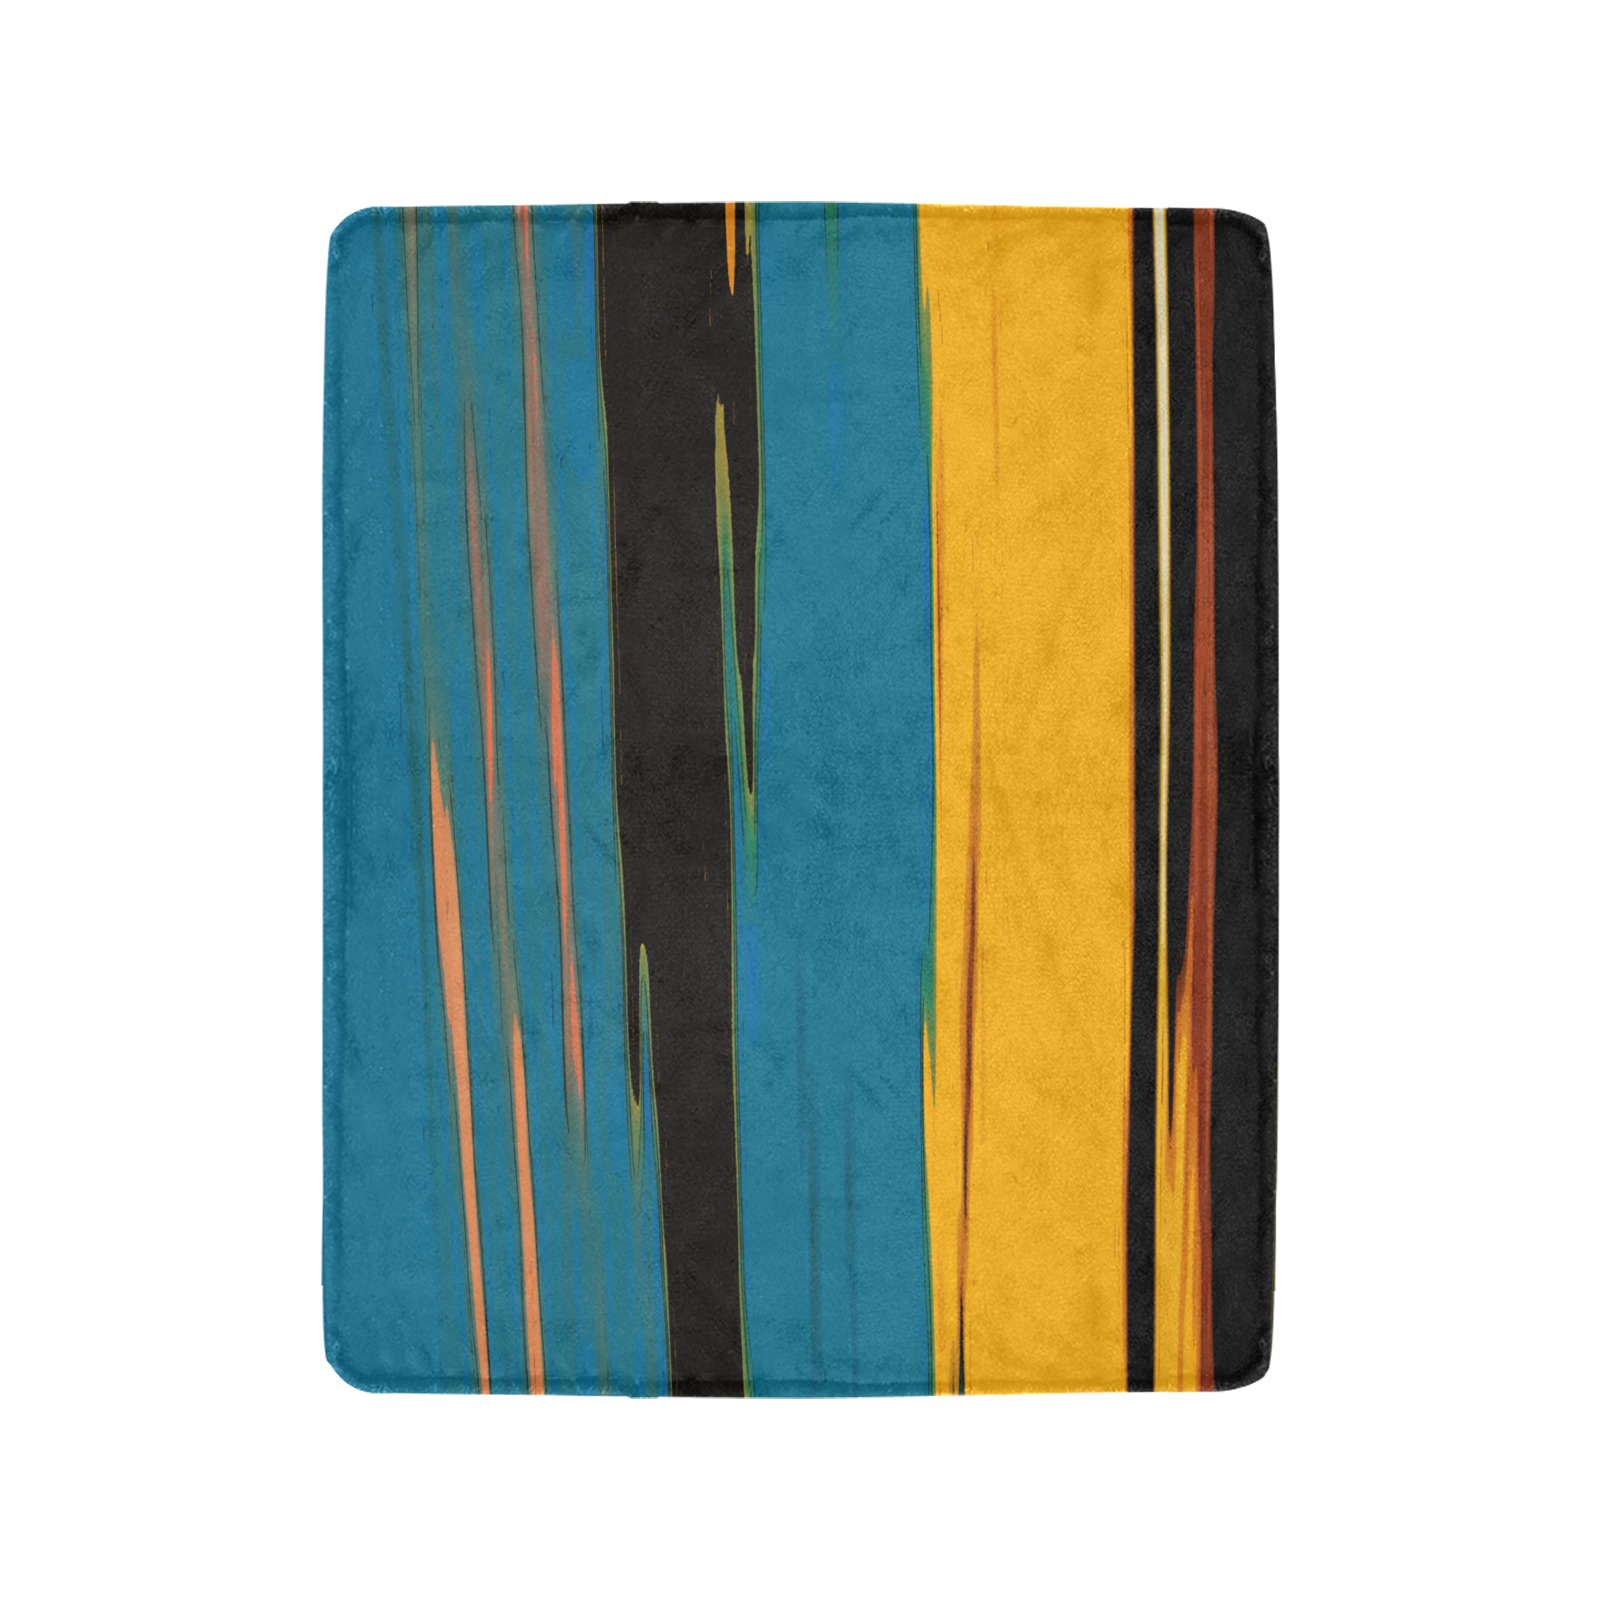 Black Turquoise And Orange Go! Abstract Art Ultra-Soft Micro Fleece Blanket 40"x50" (Thick)